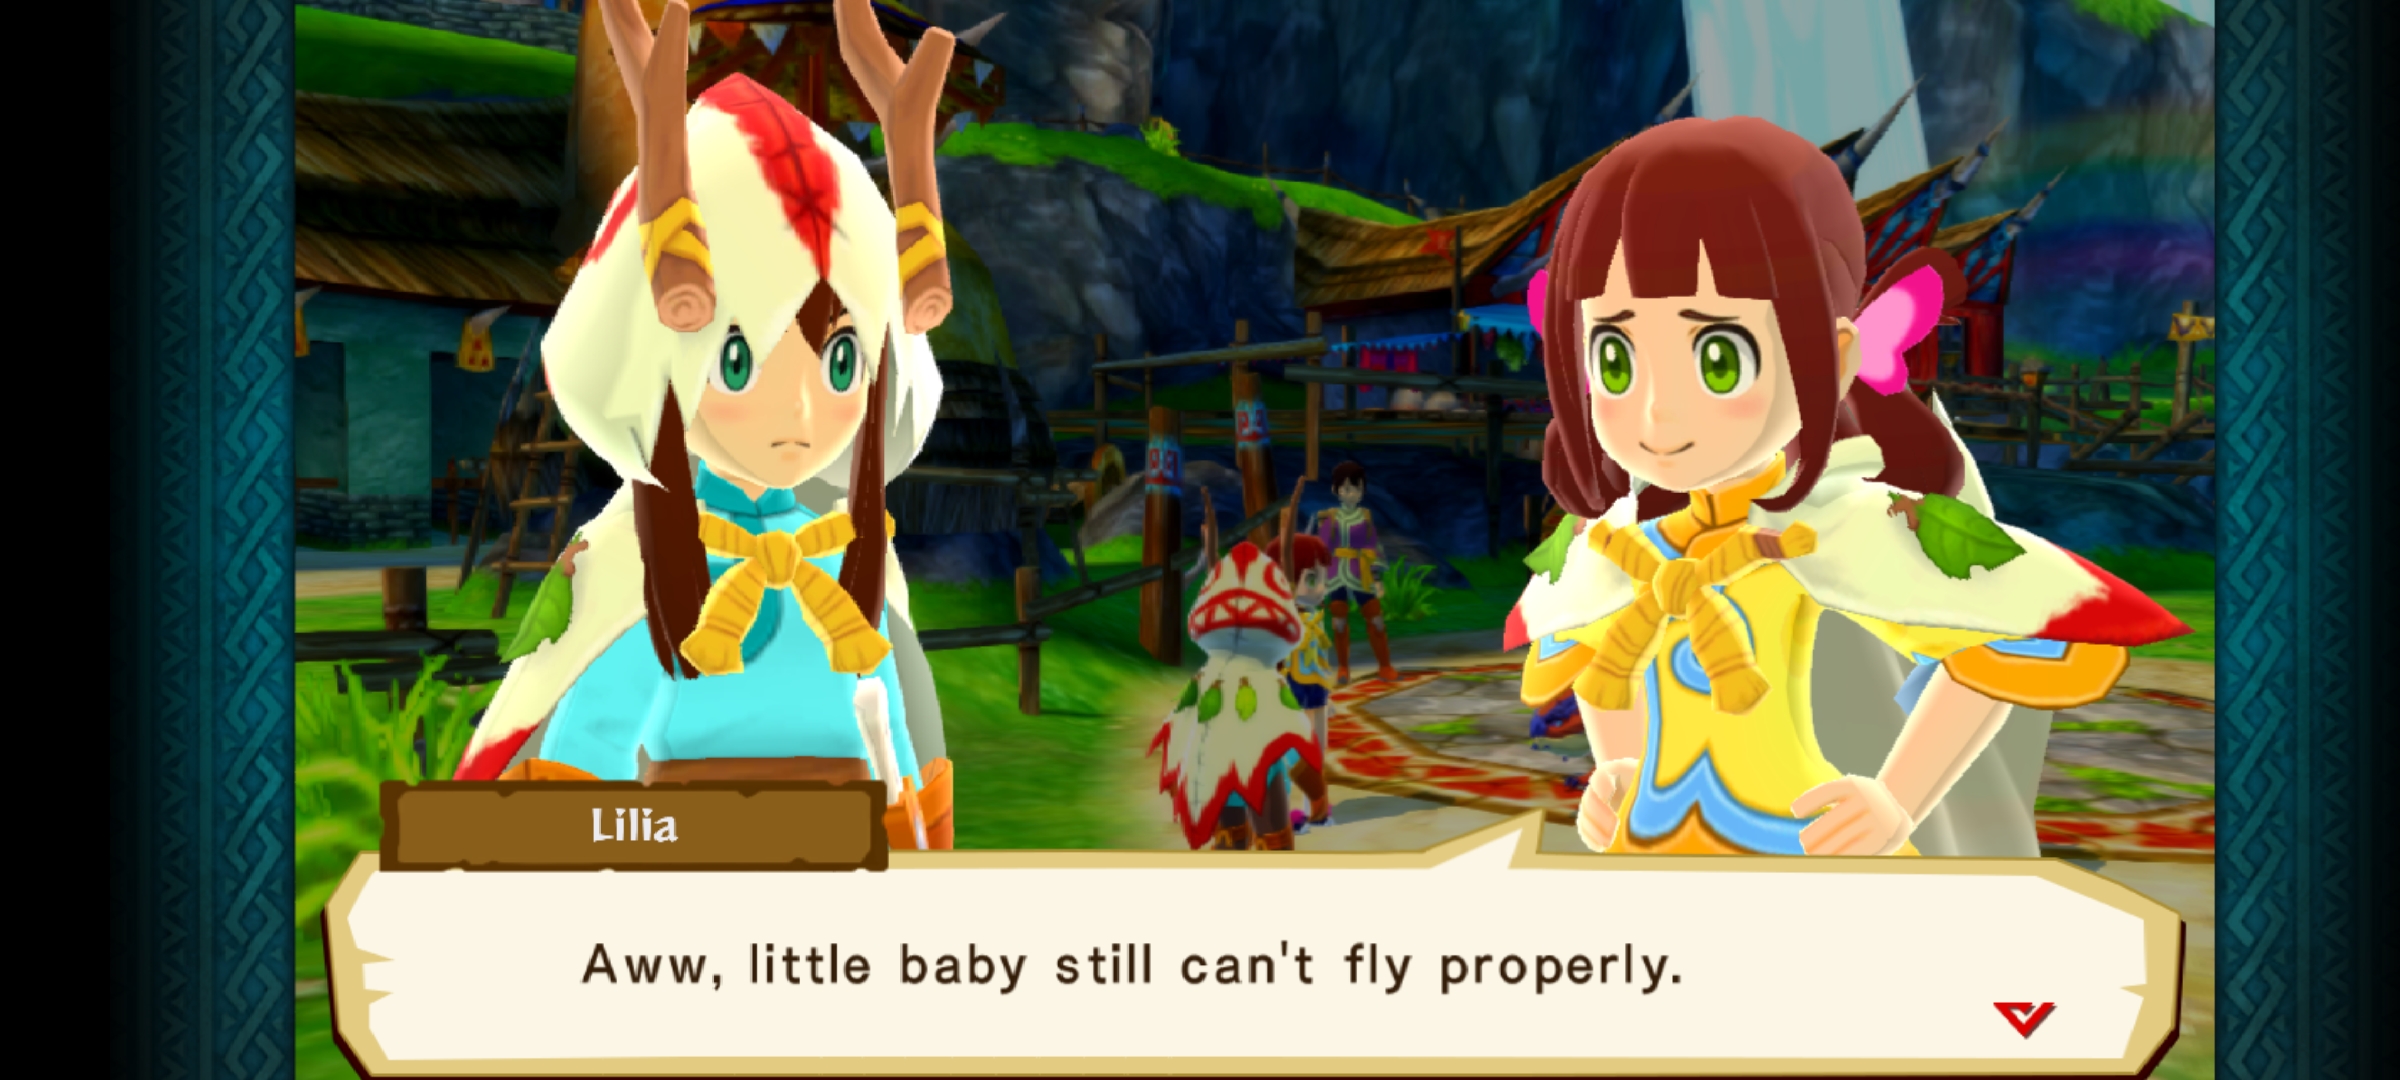 [Game Android] Monster Hunter Stories